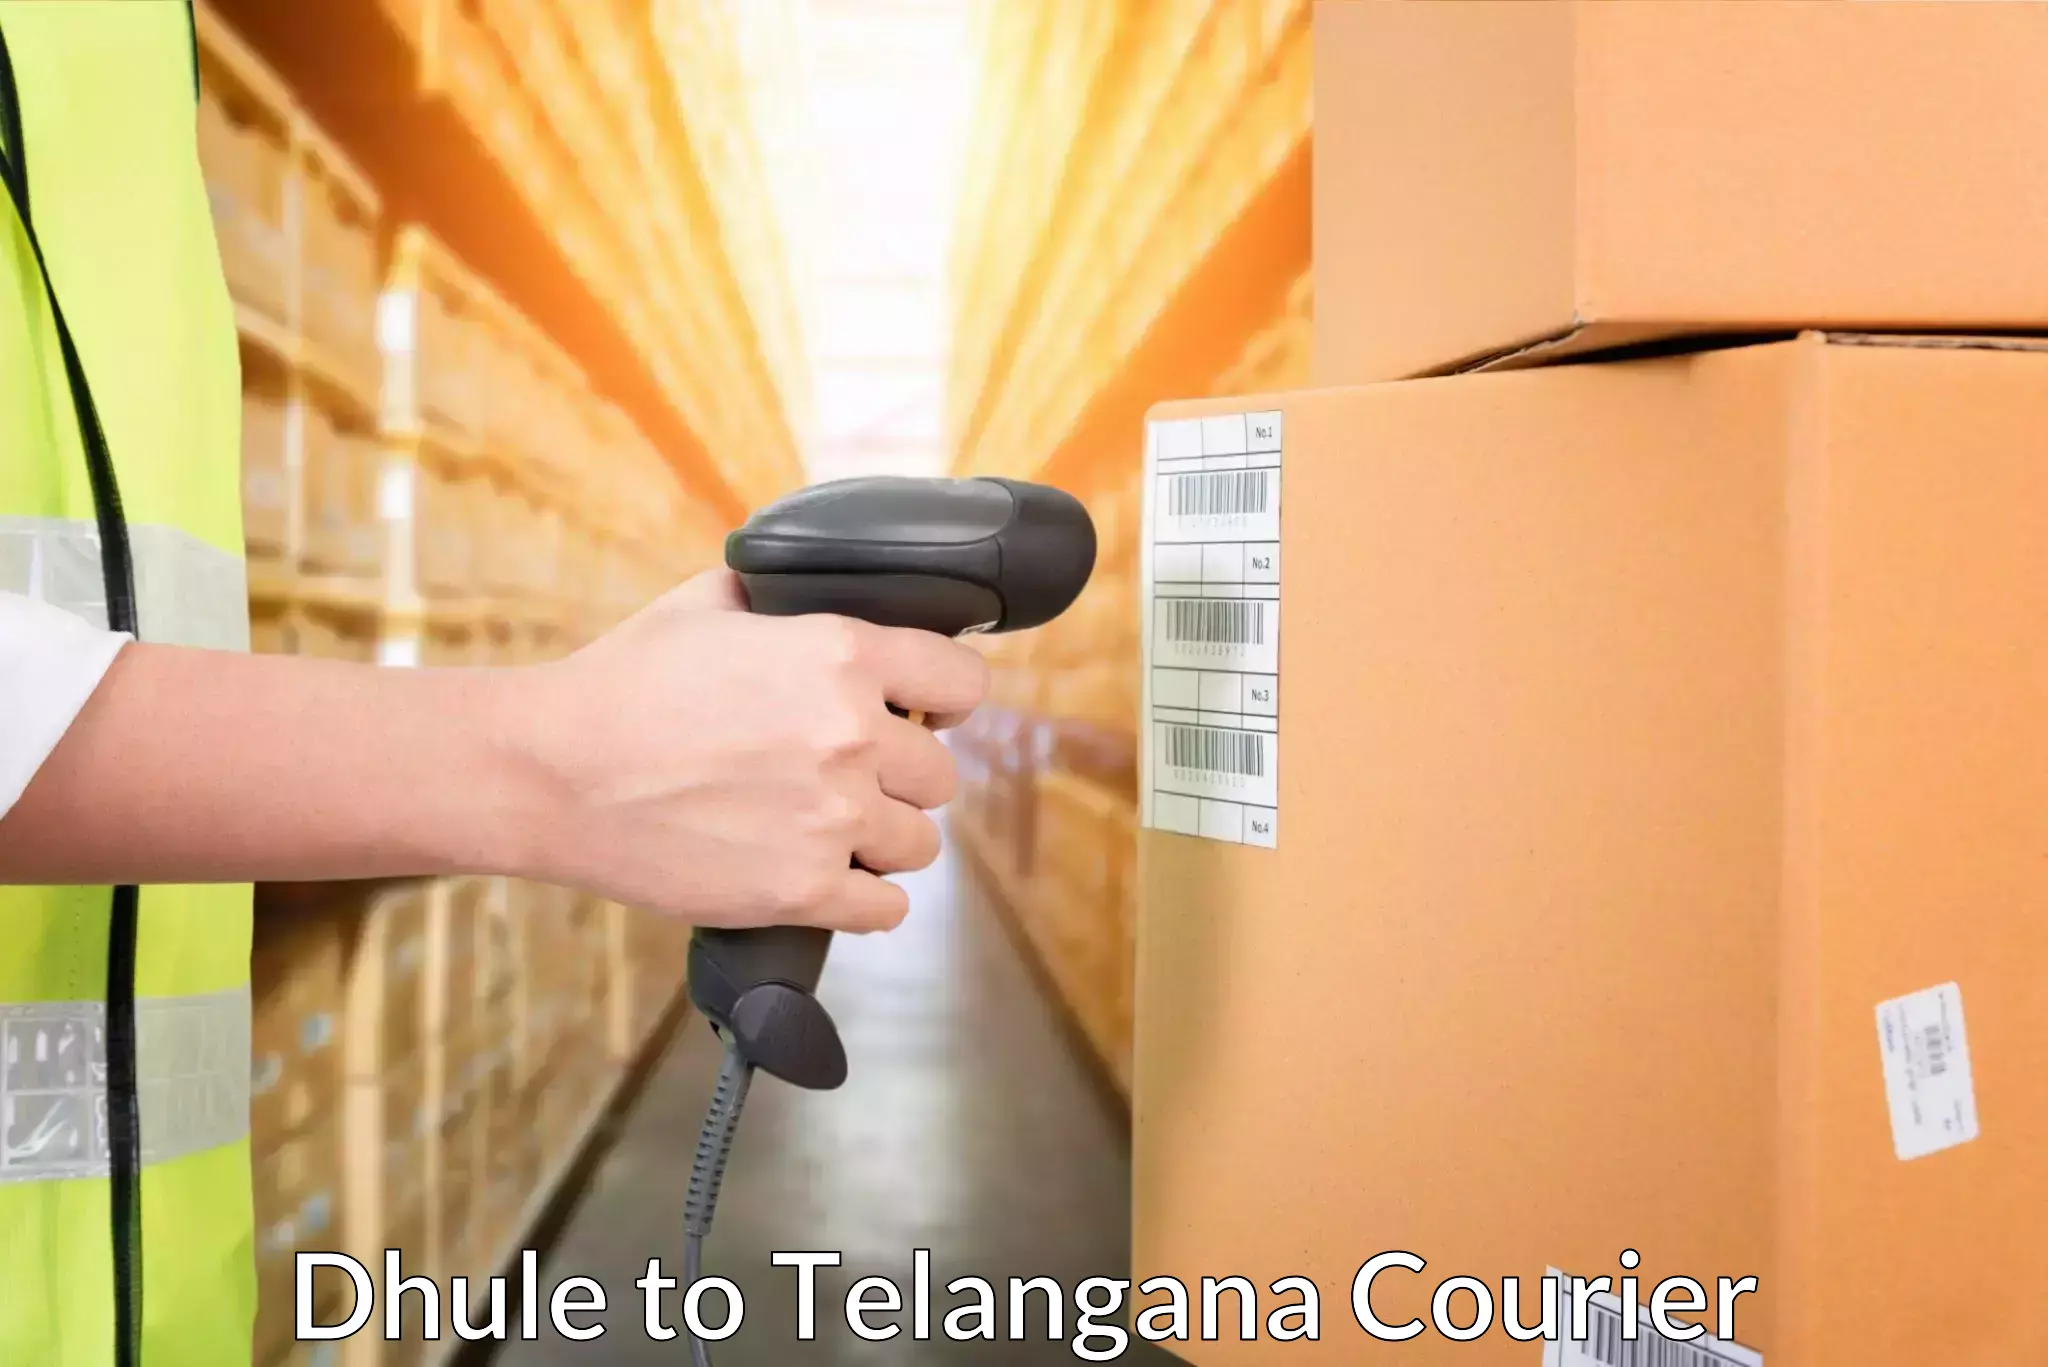 Subscription-based courier Dhule to Telangana